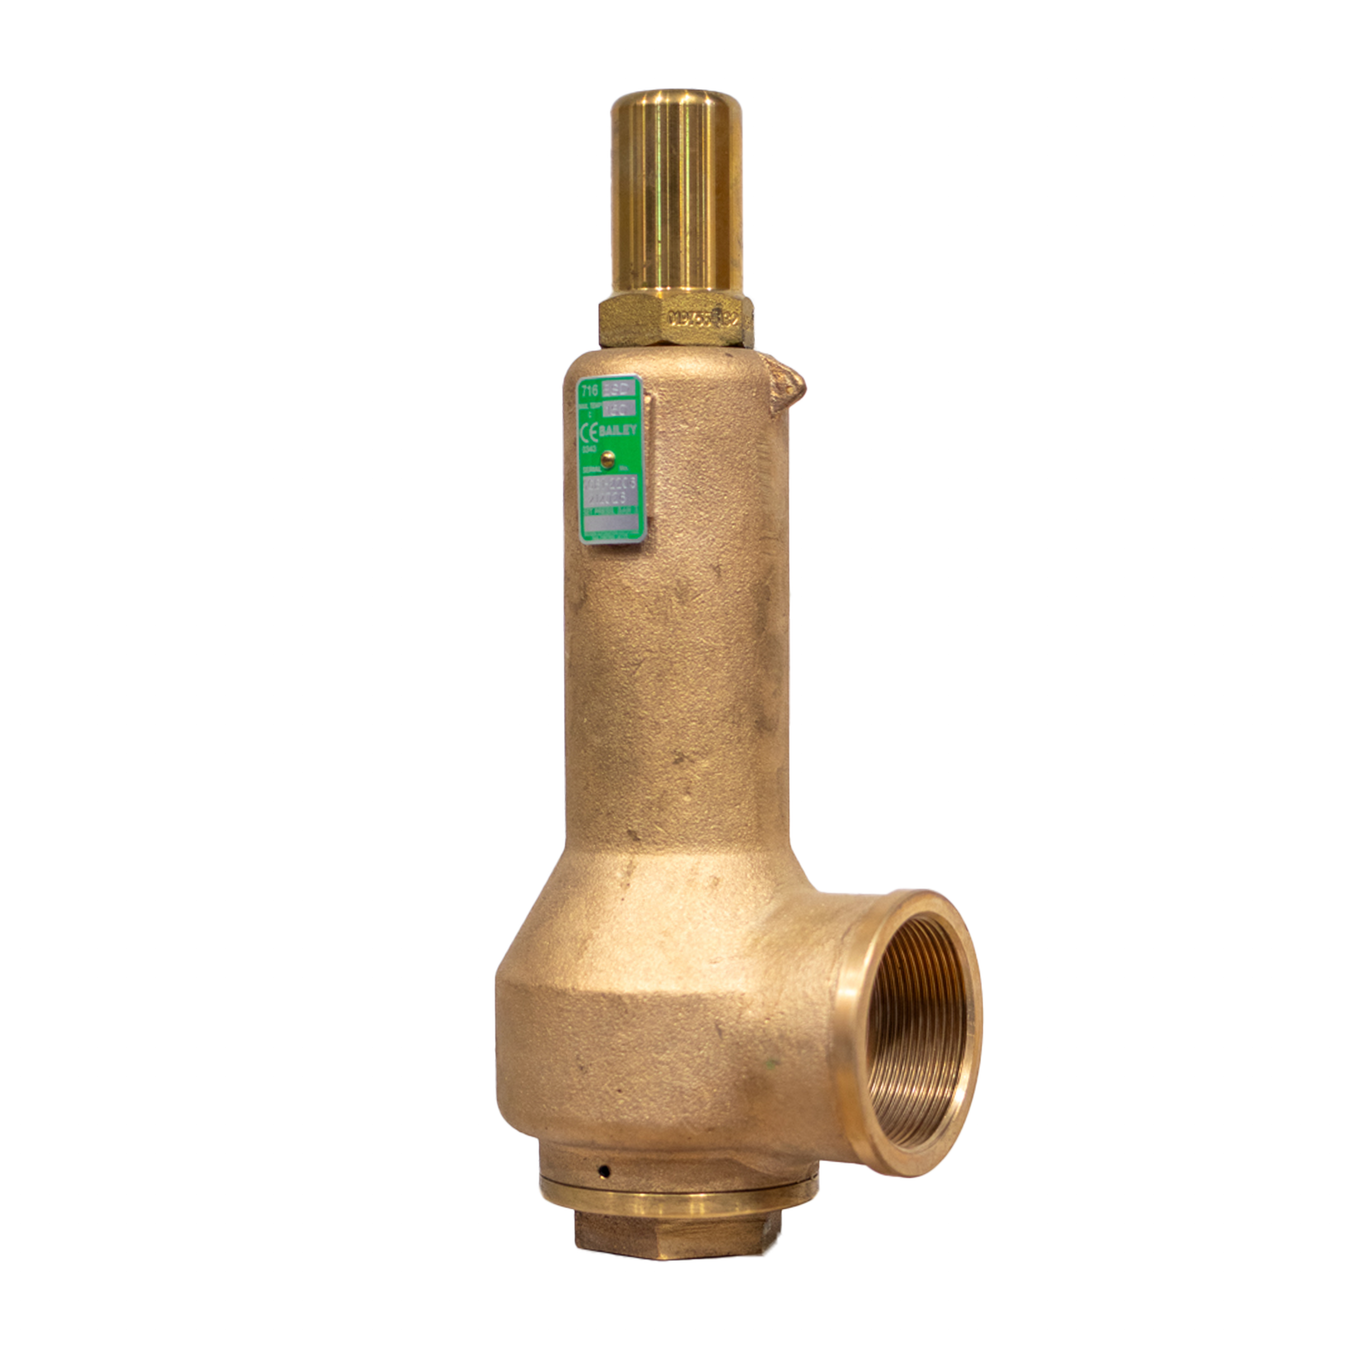 Bailey Valves available from Safety Valves Online